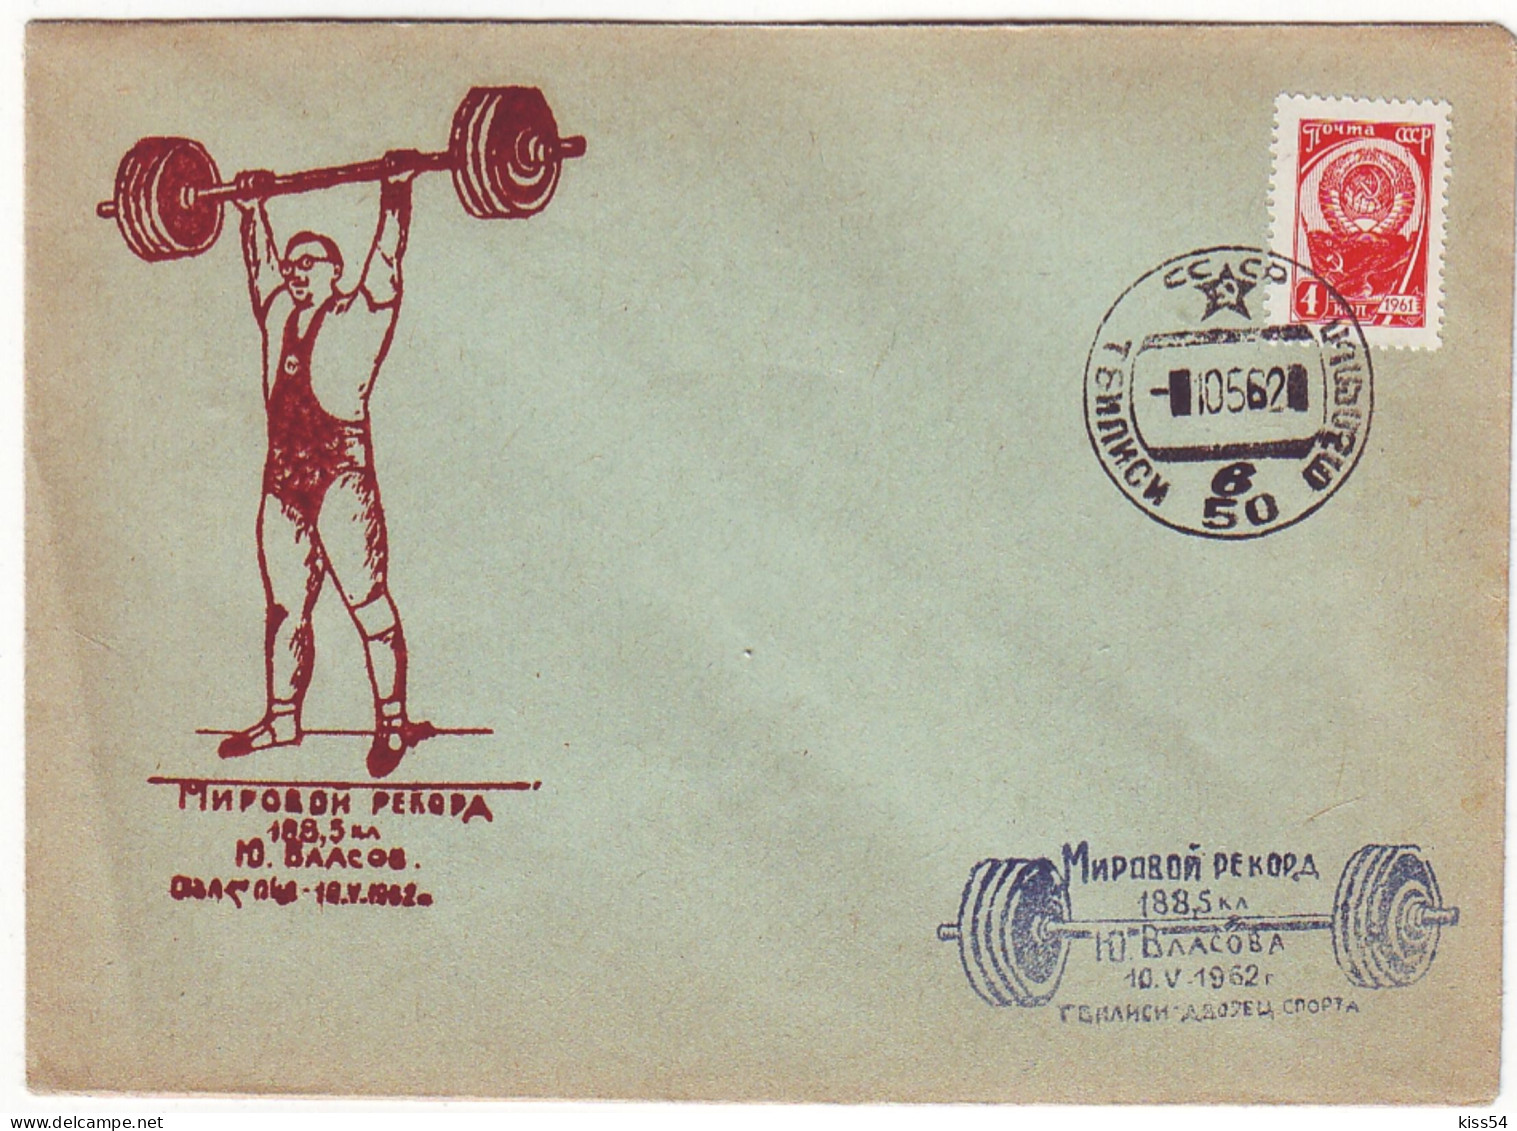 COV 994 - 808 WEIGHTLIFTING, Russia - Cover - Used - 1962 - Weightlifting